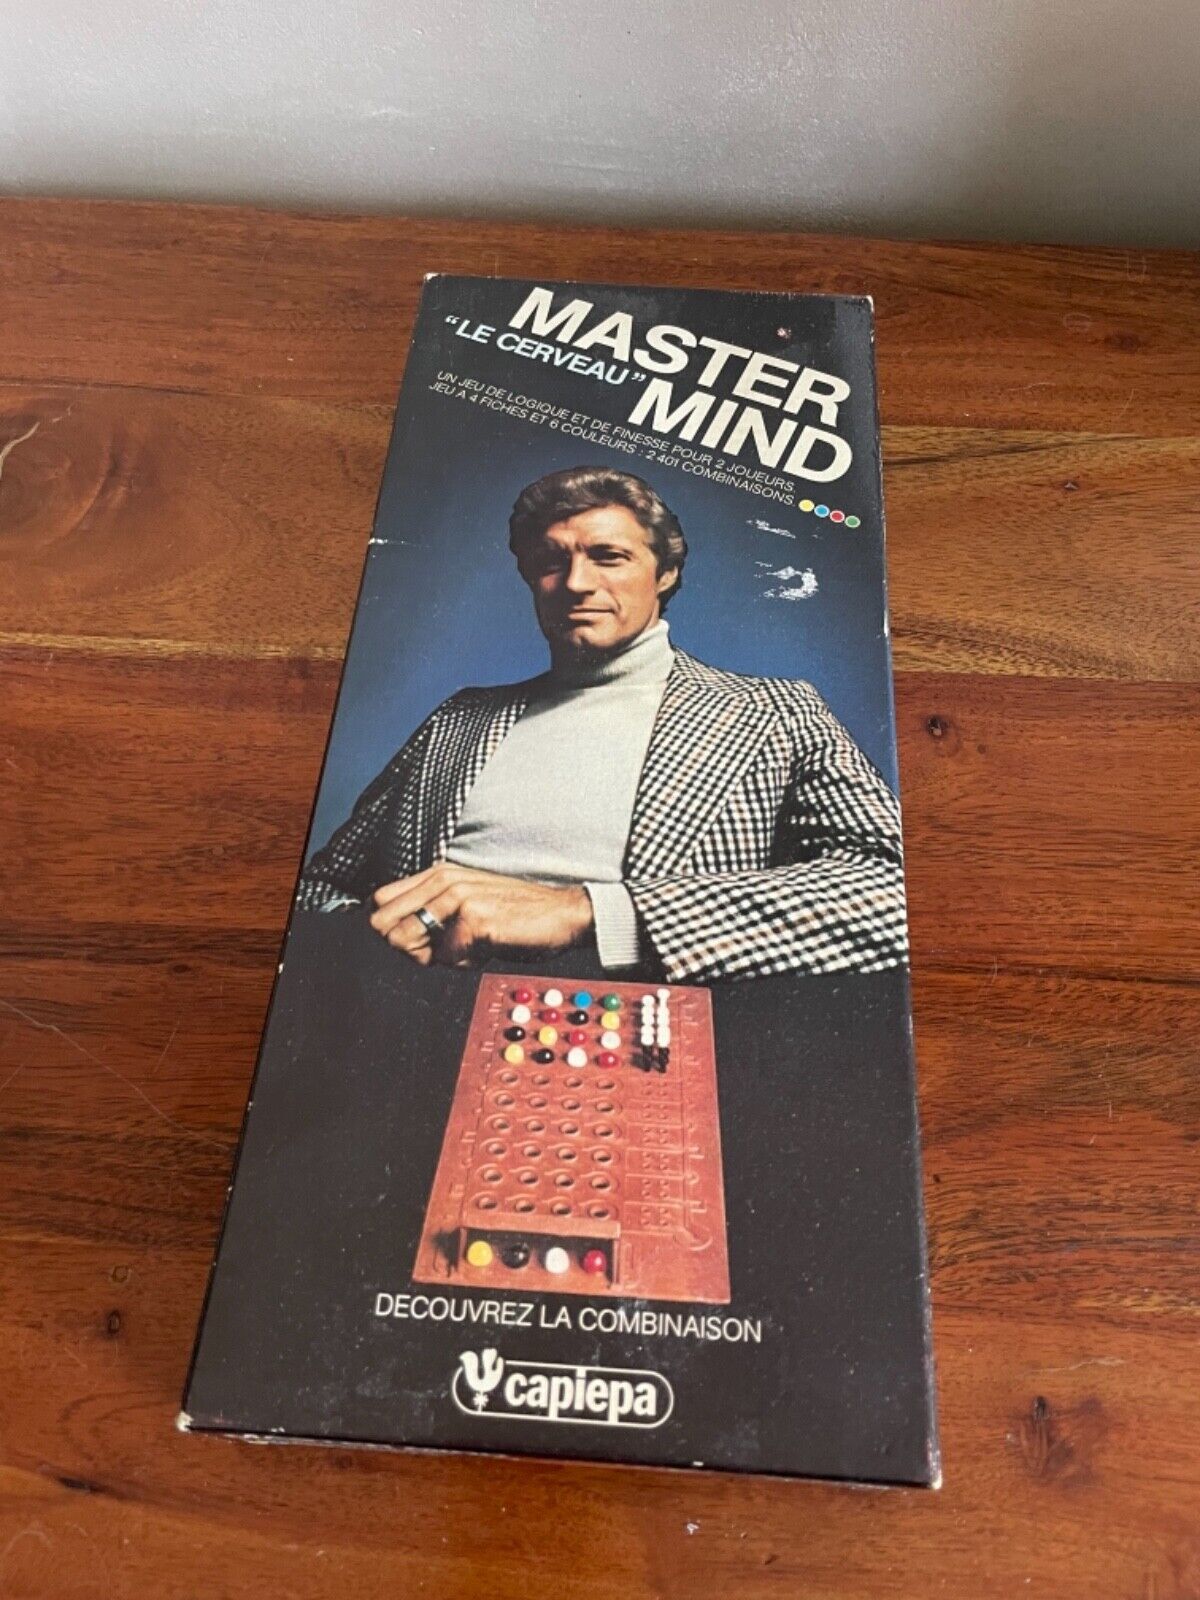 Max 52% OFF Game vintage mastermind Fort Worth Mall brain the capiepa